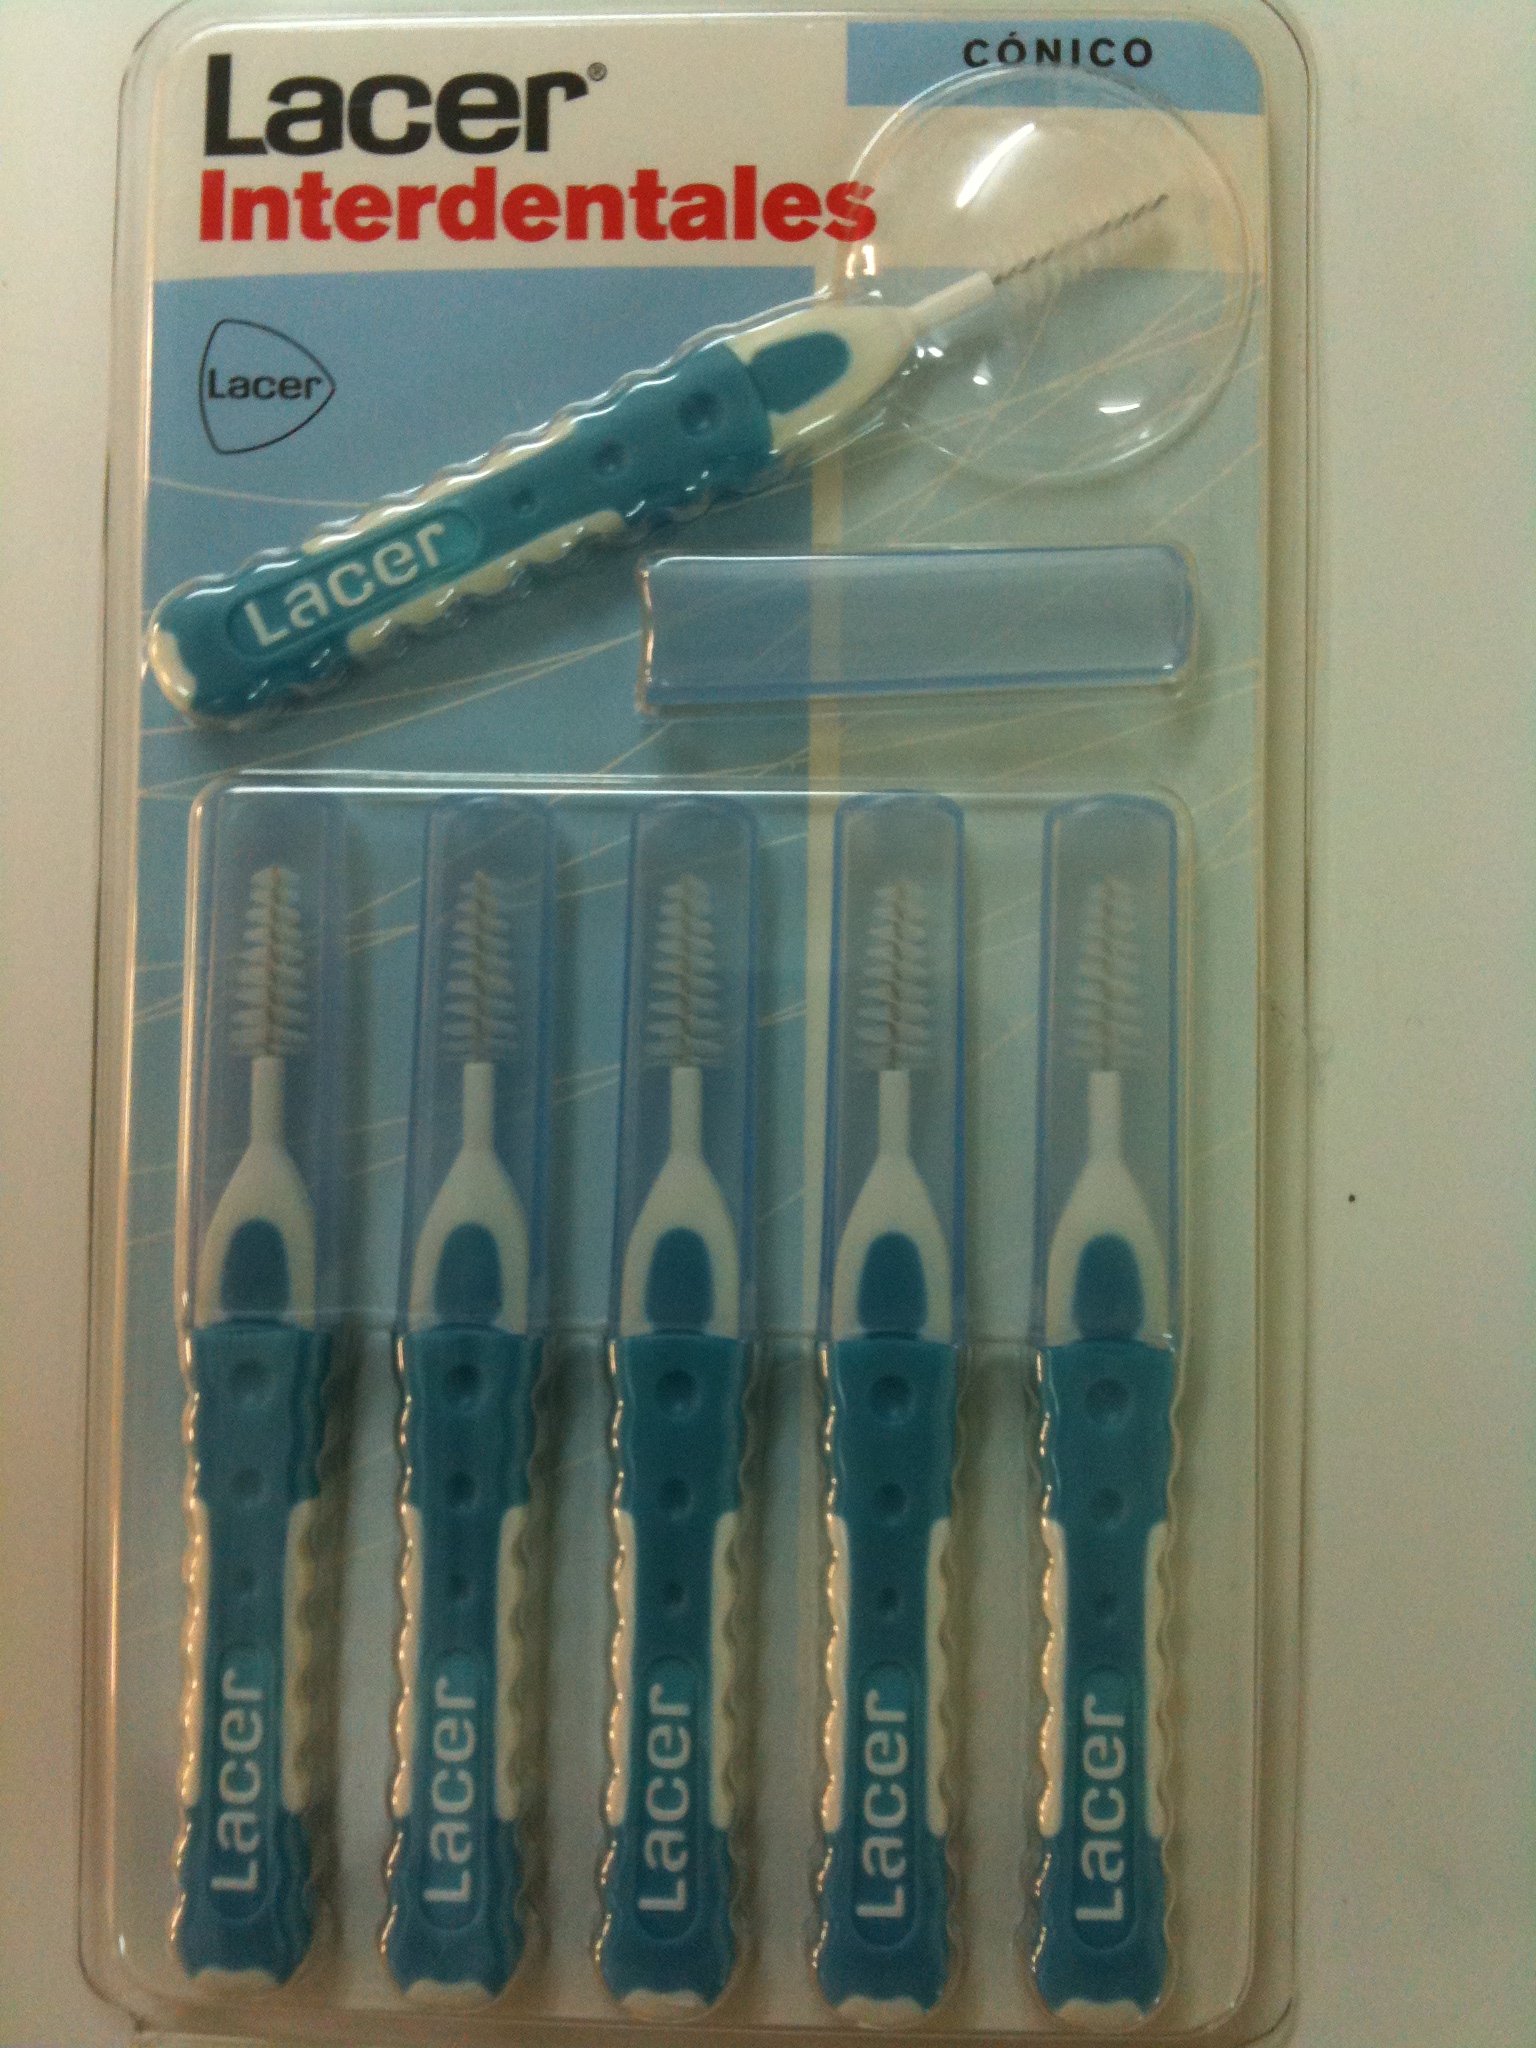 LACER INTERDENTAL CONIC BOX WITH 6 UNITS